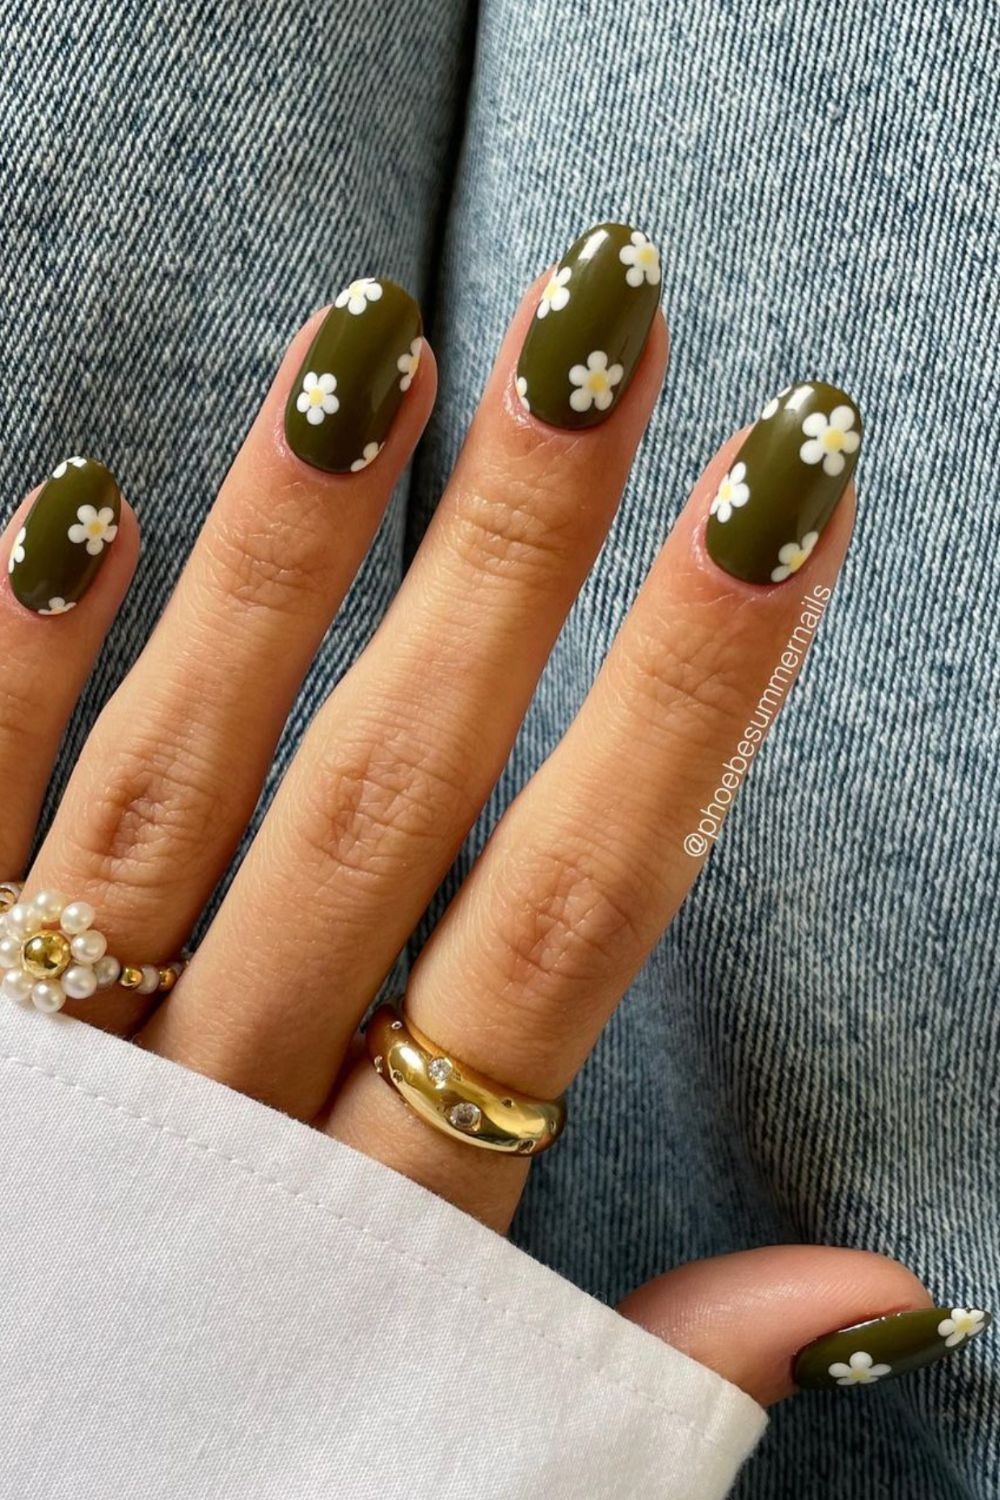 Olive Green with White Daisies